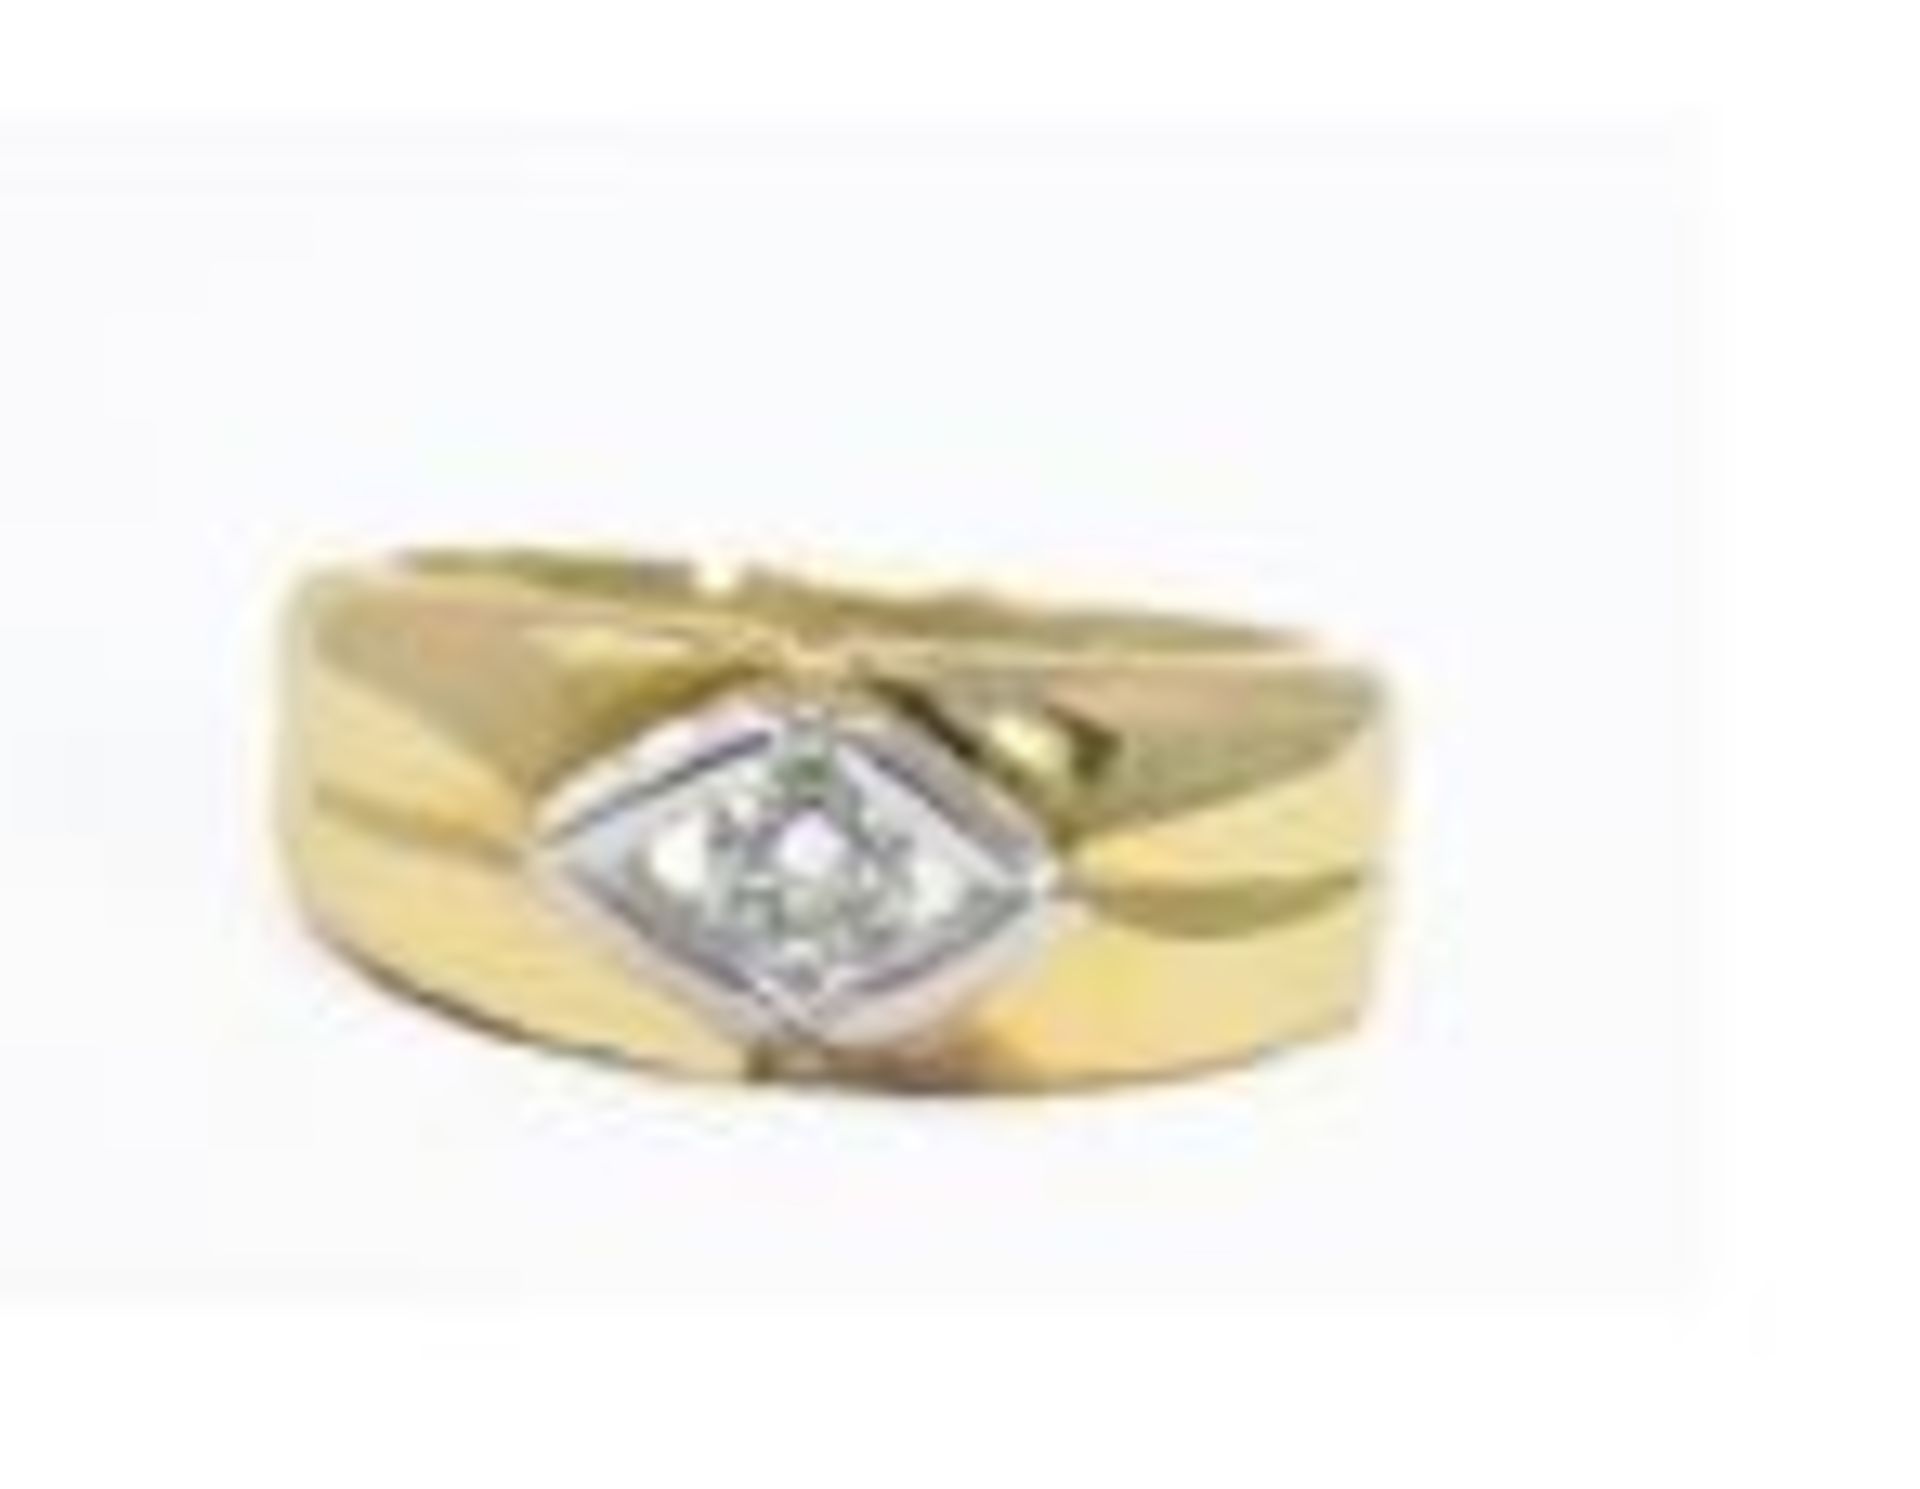 Diamond Ring, 9ct Yellow Gold, Weight 3.73g, Diamond Weight 0.22ct, Colour H, Clarity SI1 - SI2,